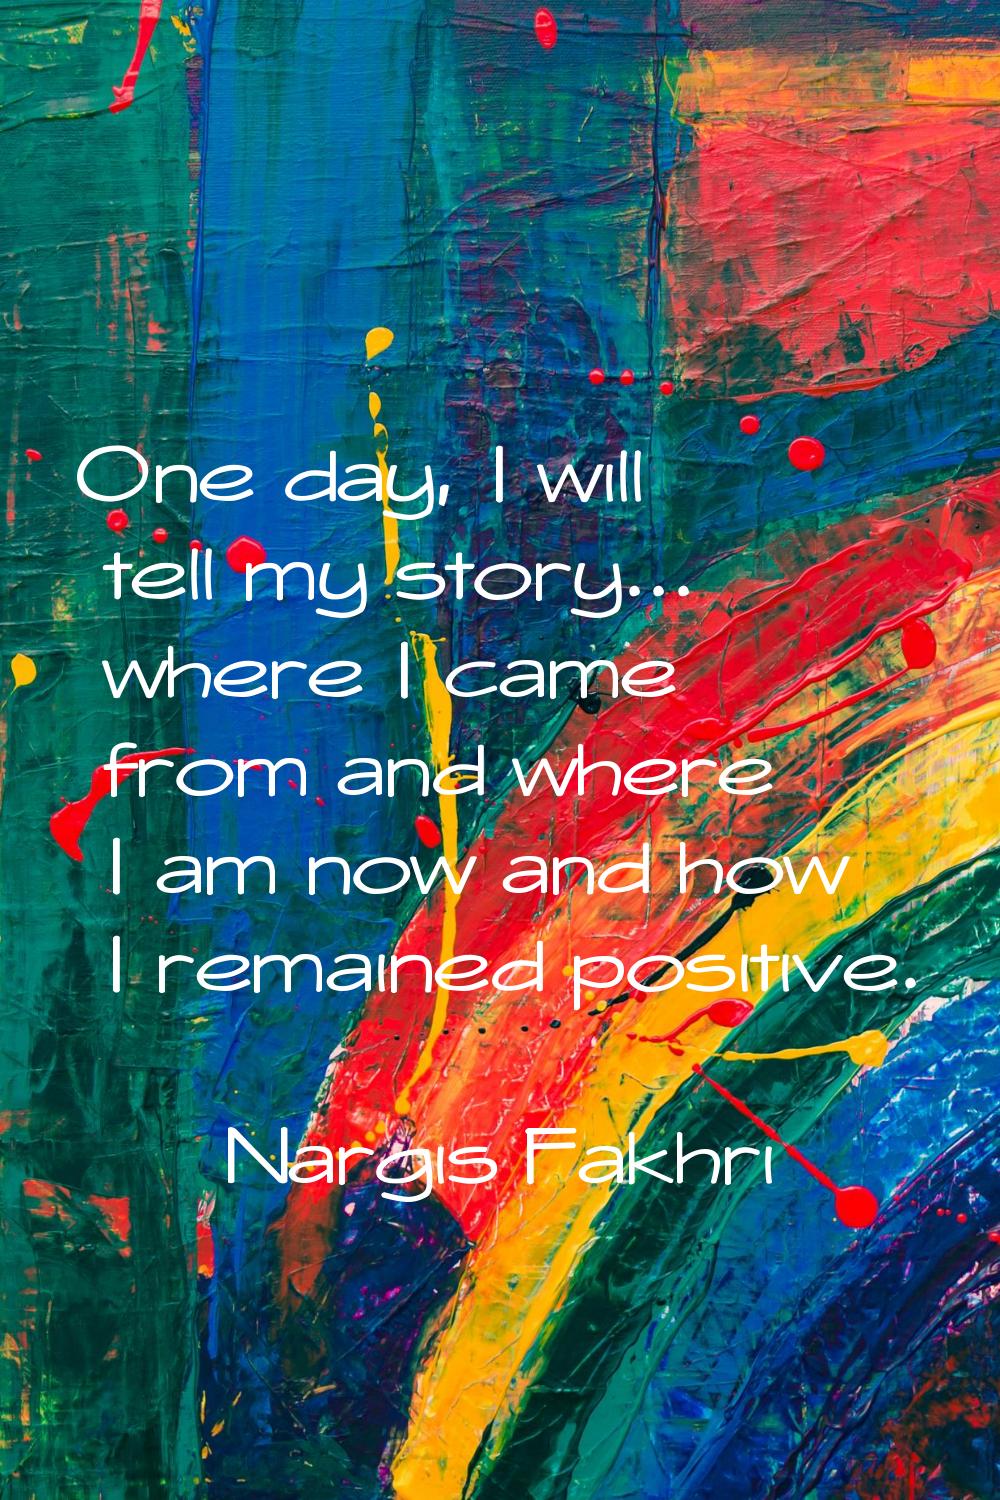 One day, I will tell my story... where I came from and where I am now and how I remained positive.